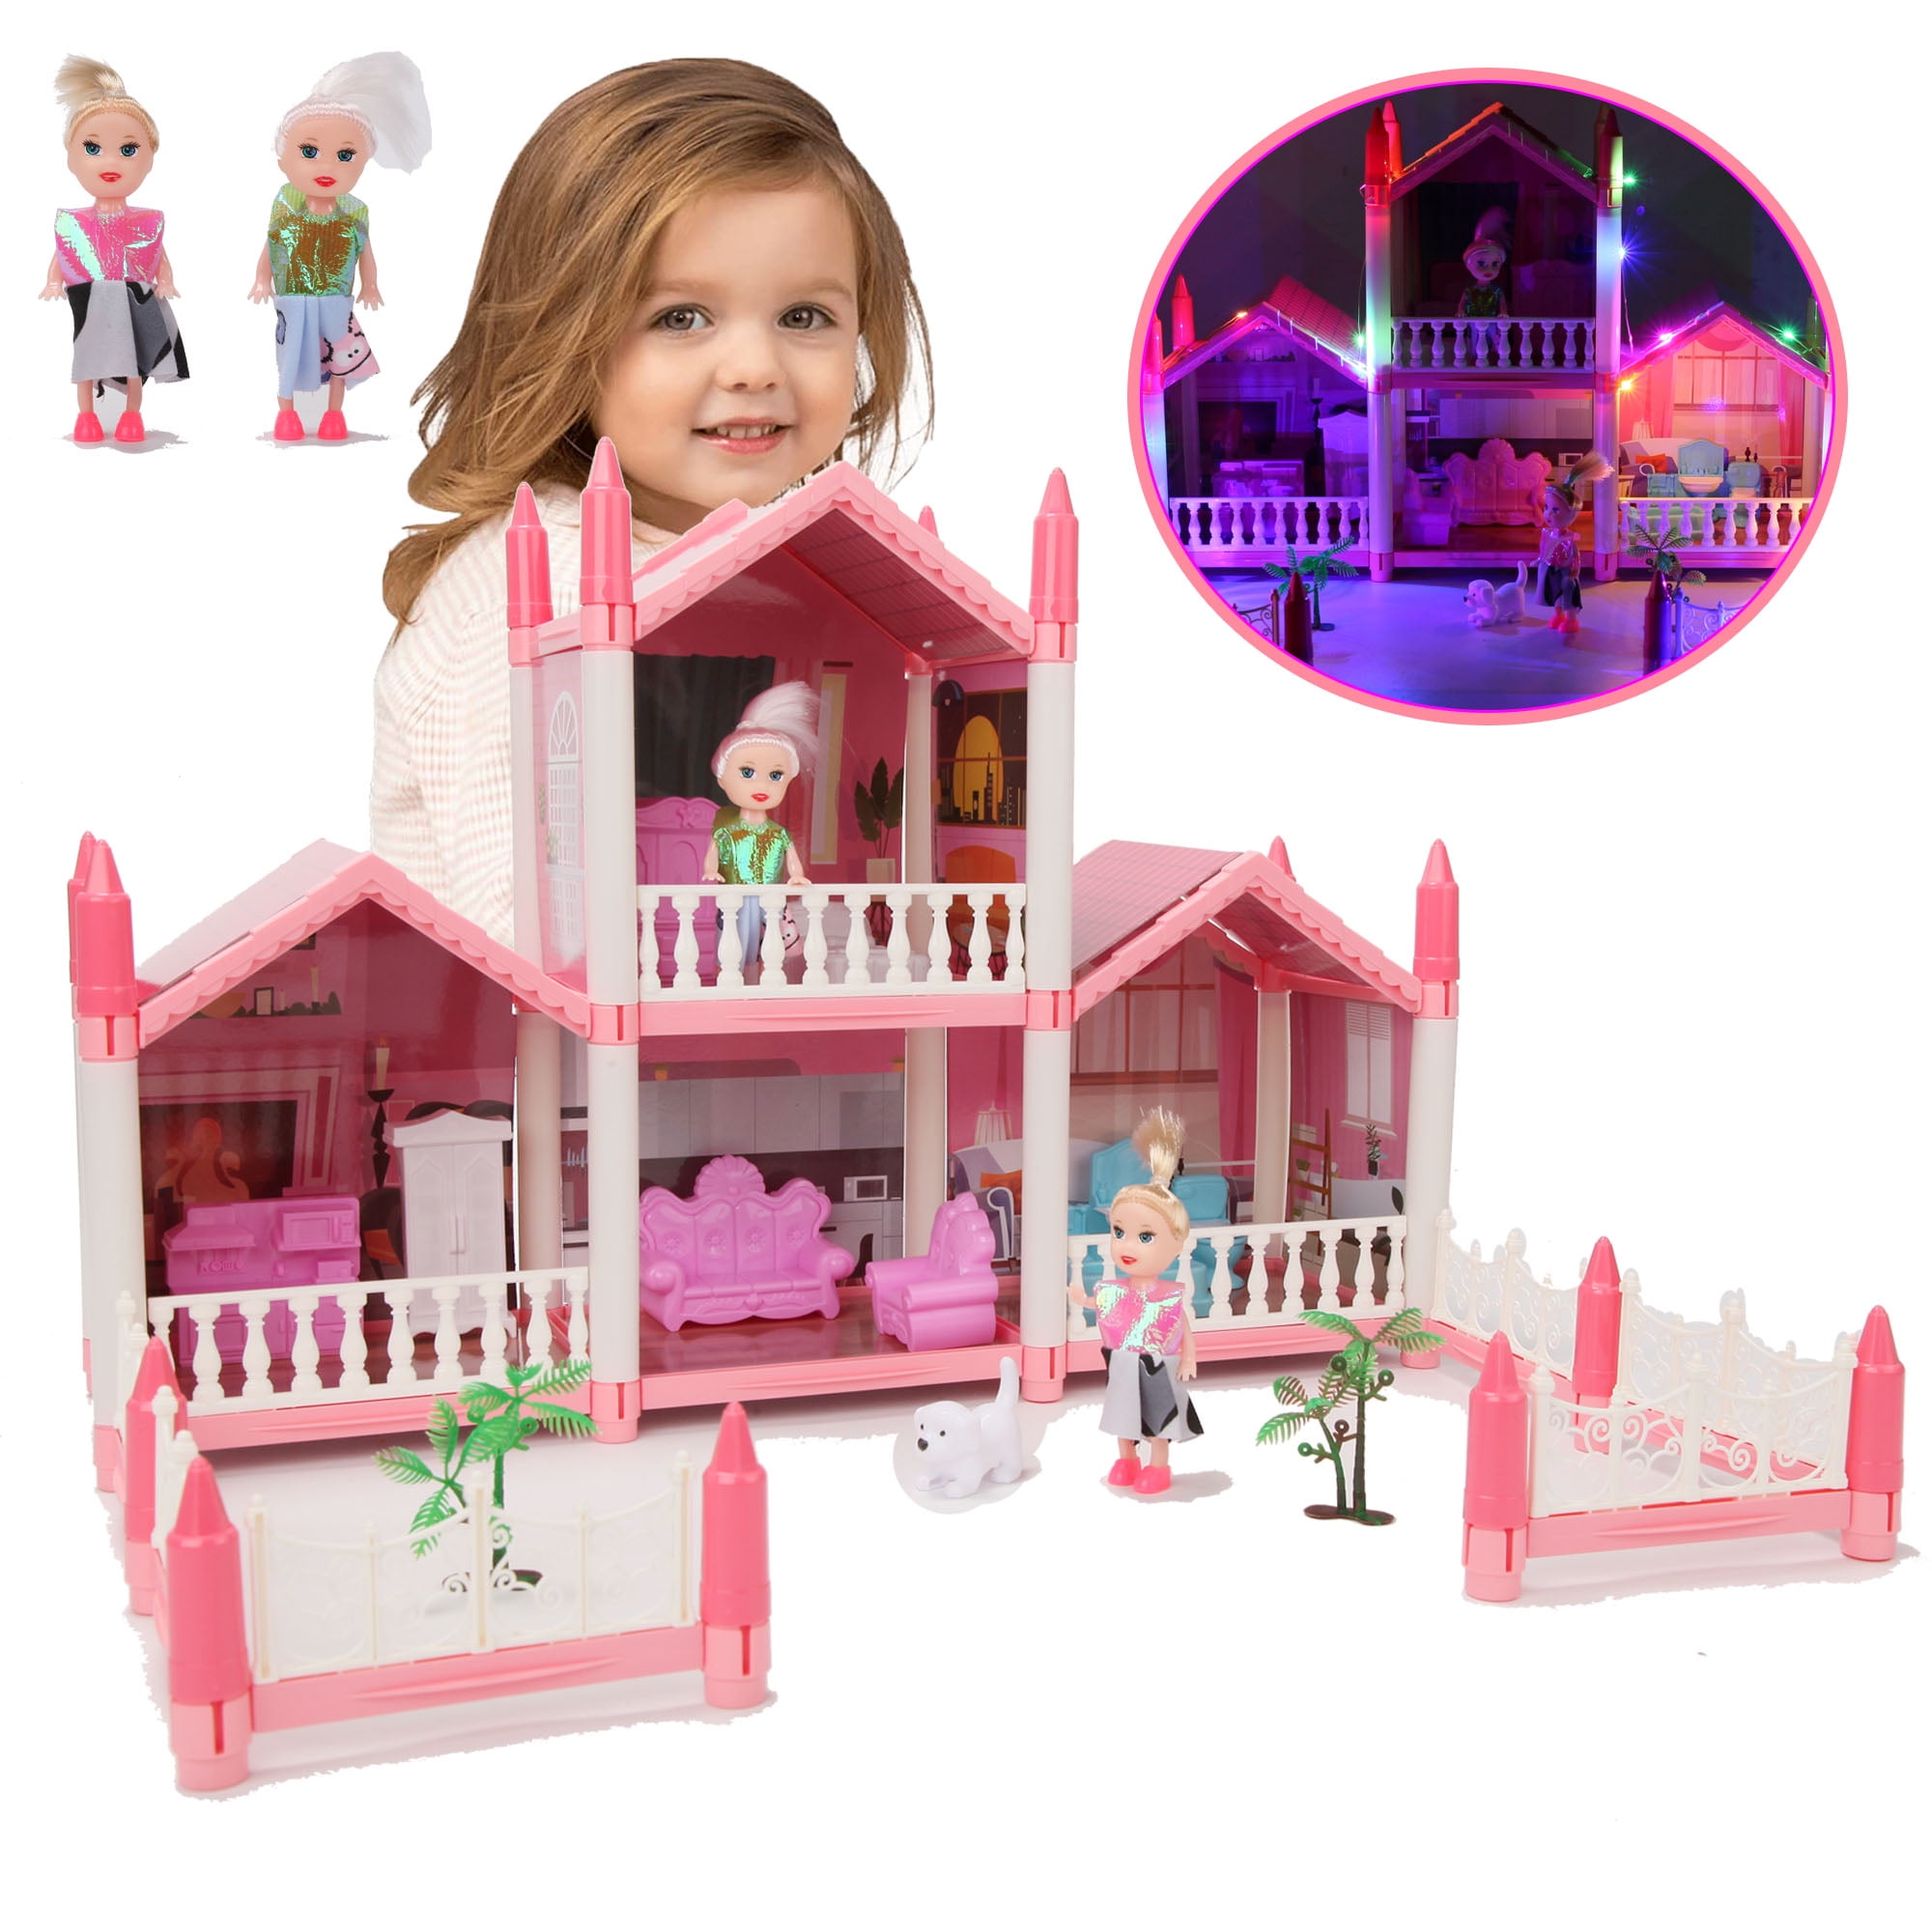 Wisairt Doll House for Girls, DIY Dollhouses Set with 6 Rooms 3 Terraces,  20Pcs Pretend Play House Accessories for Kids Gifts Ages 4-8, Pink 